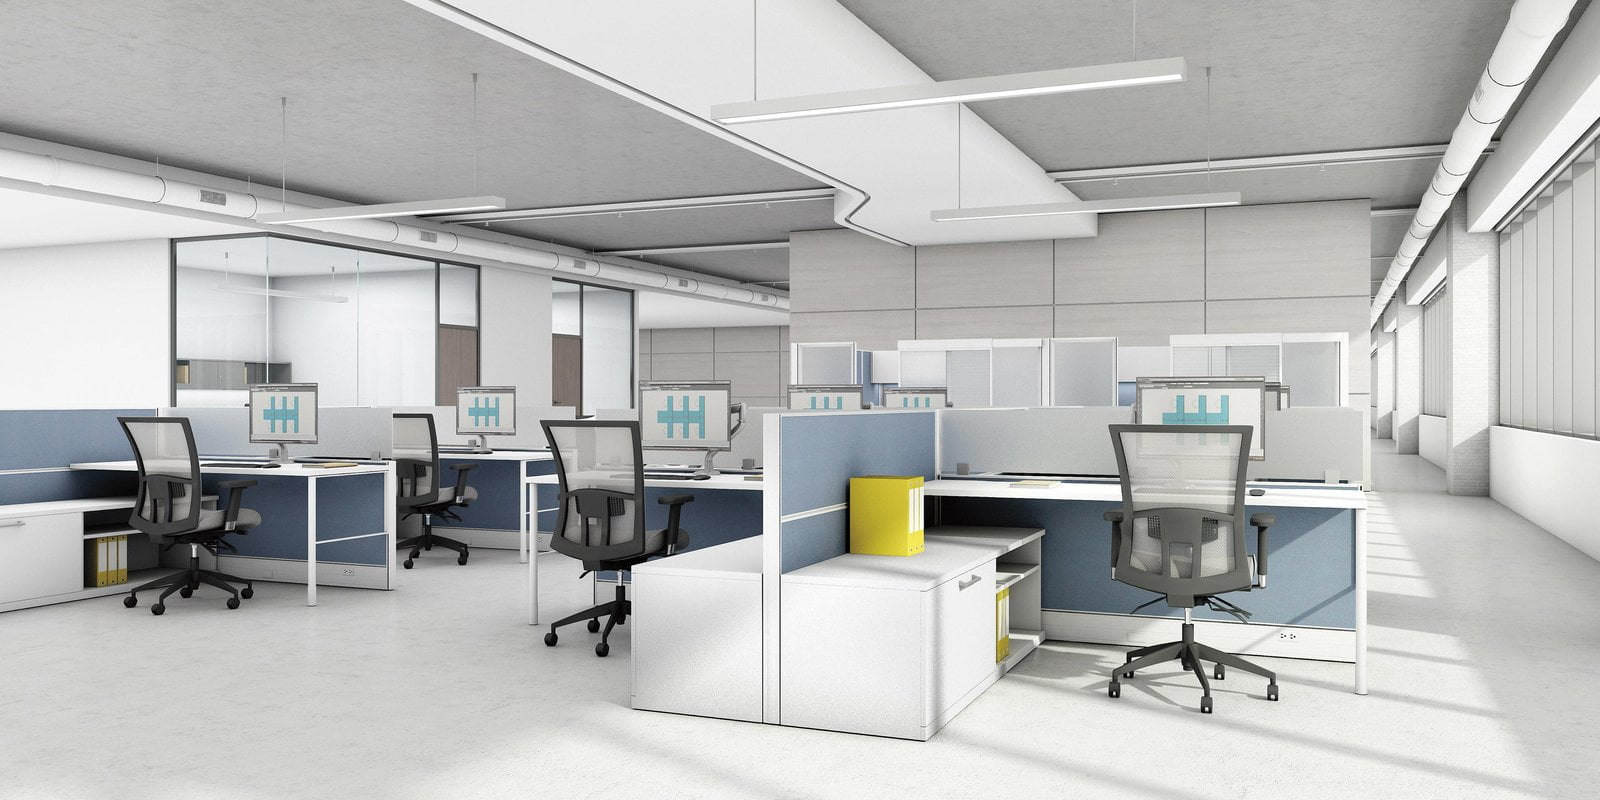 An array of Compile model workstations in an open office plan. Each workstation has a rollaway chair, computer and set of storage to one side.